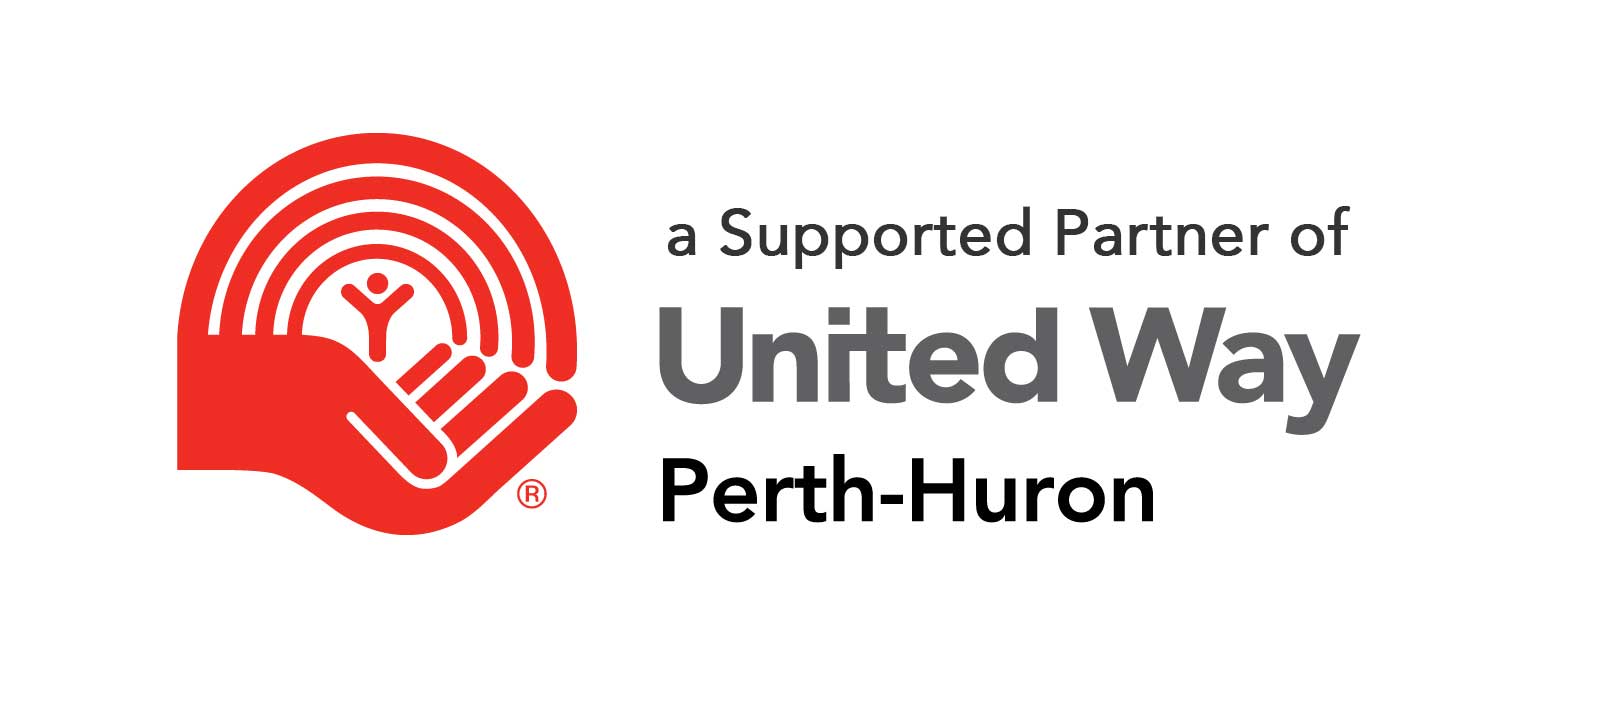 a Supported Partner of United Way Perth-Huron